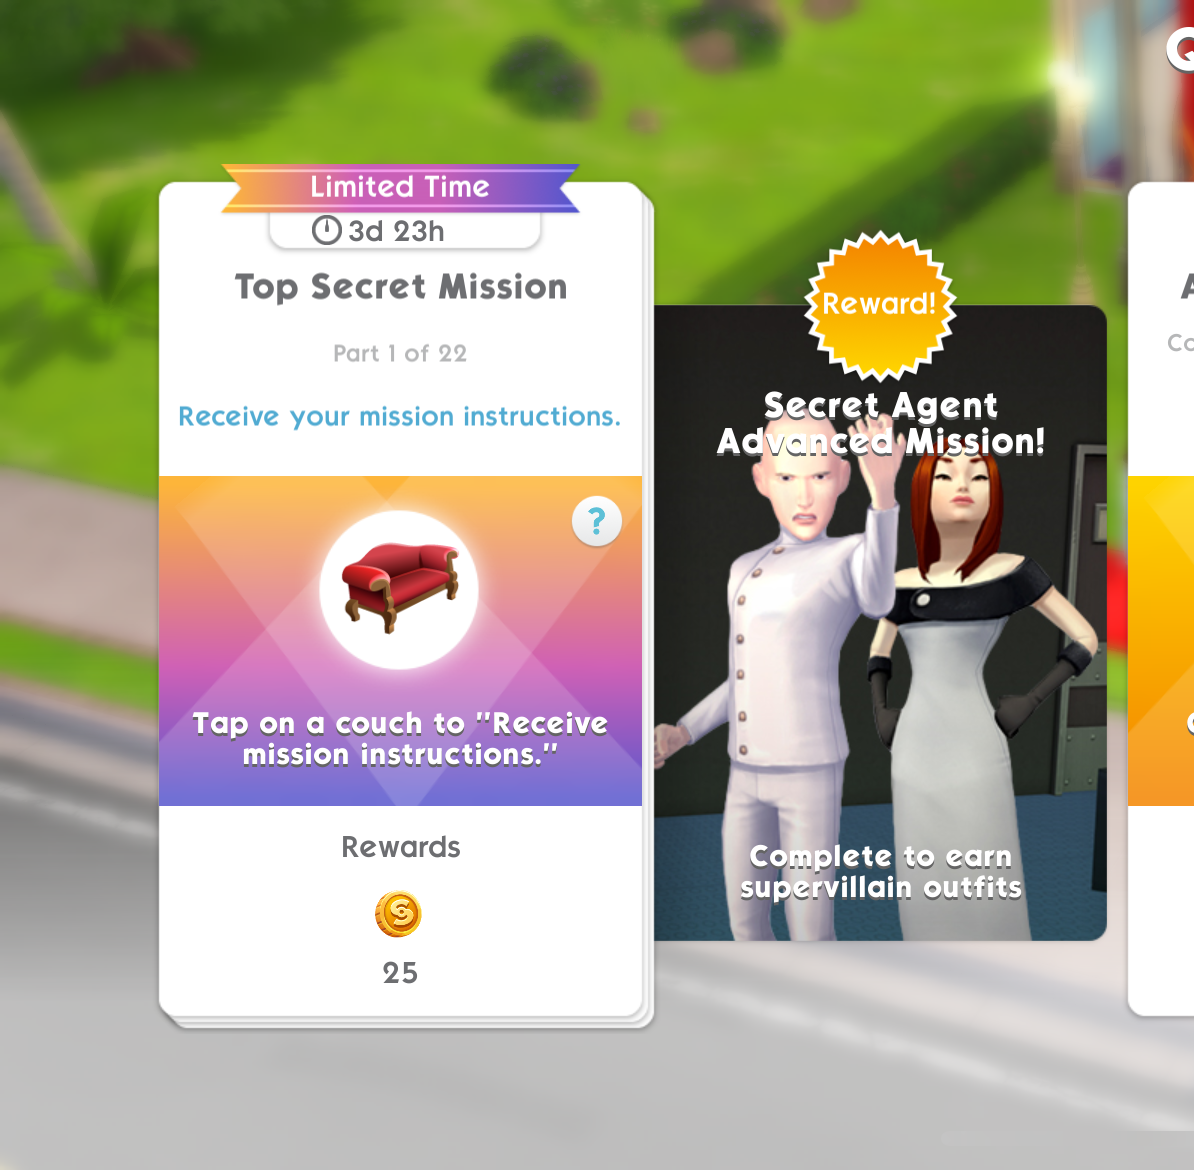 Ad. How to complete The Sims Mobile Secret Agent Advanced Mission Quest